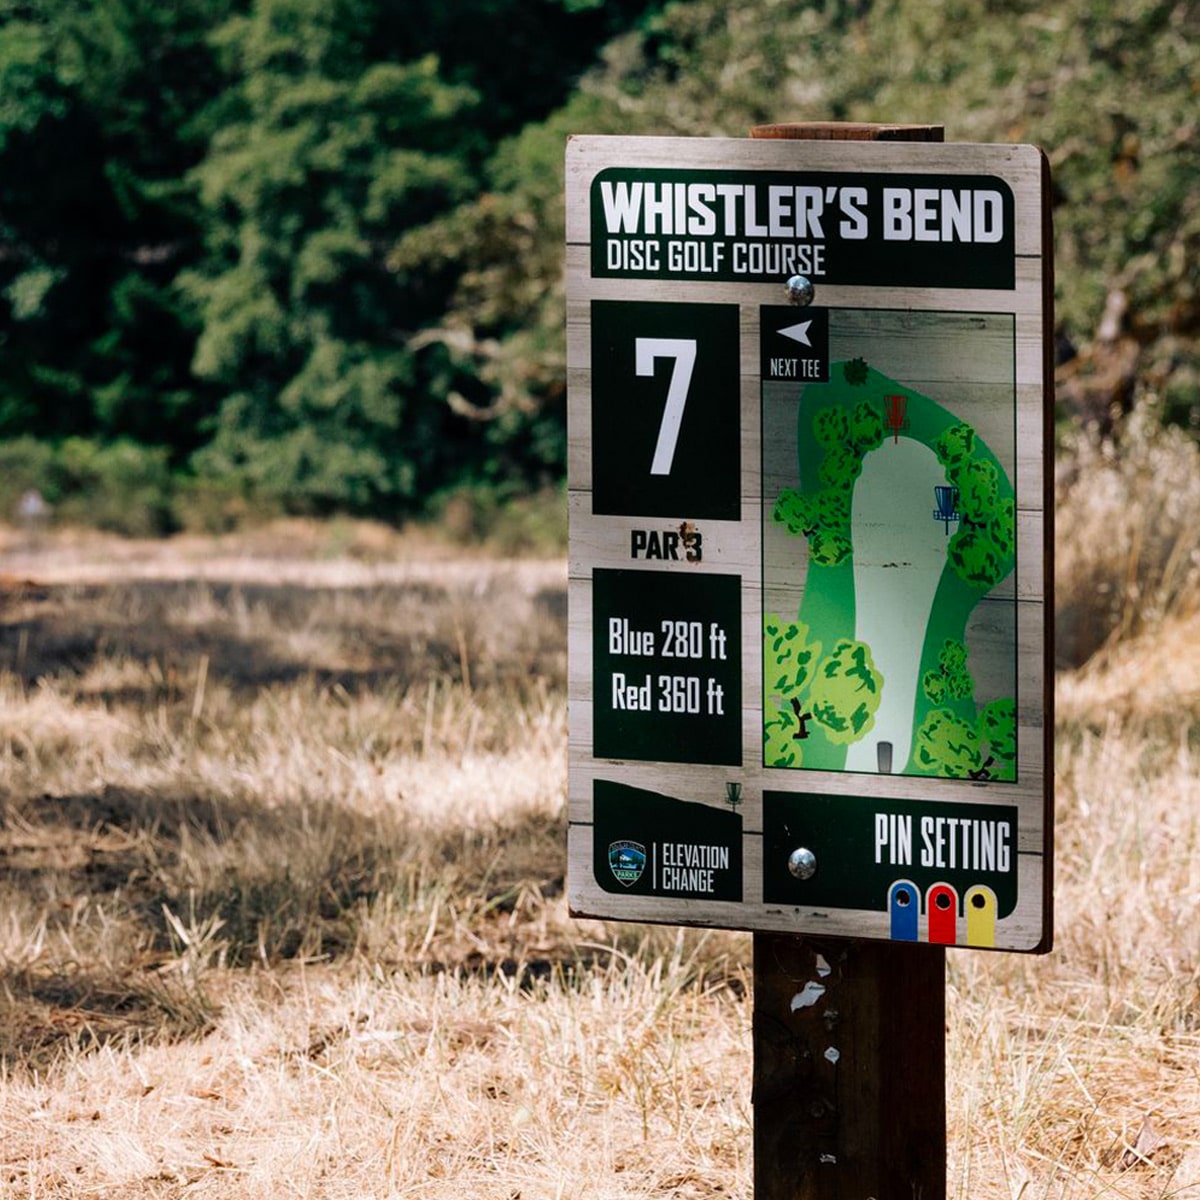 Whistler's Bend disc golf course tee signs. Photo by @dgphotographer on udisc.com.